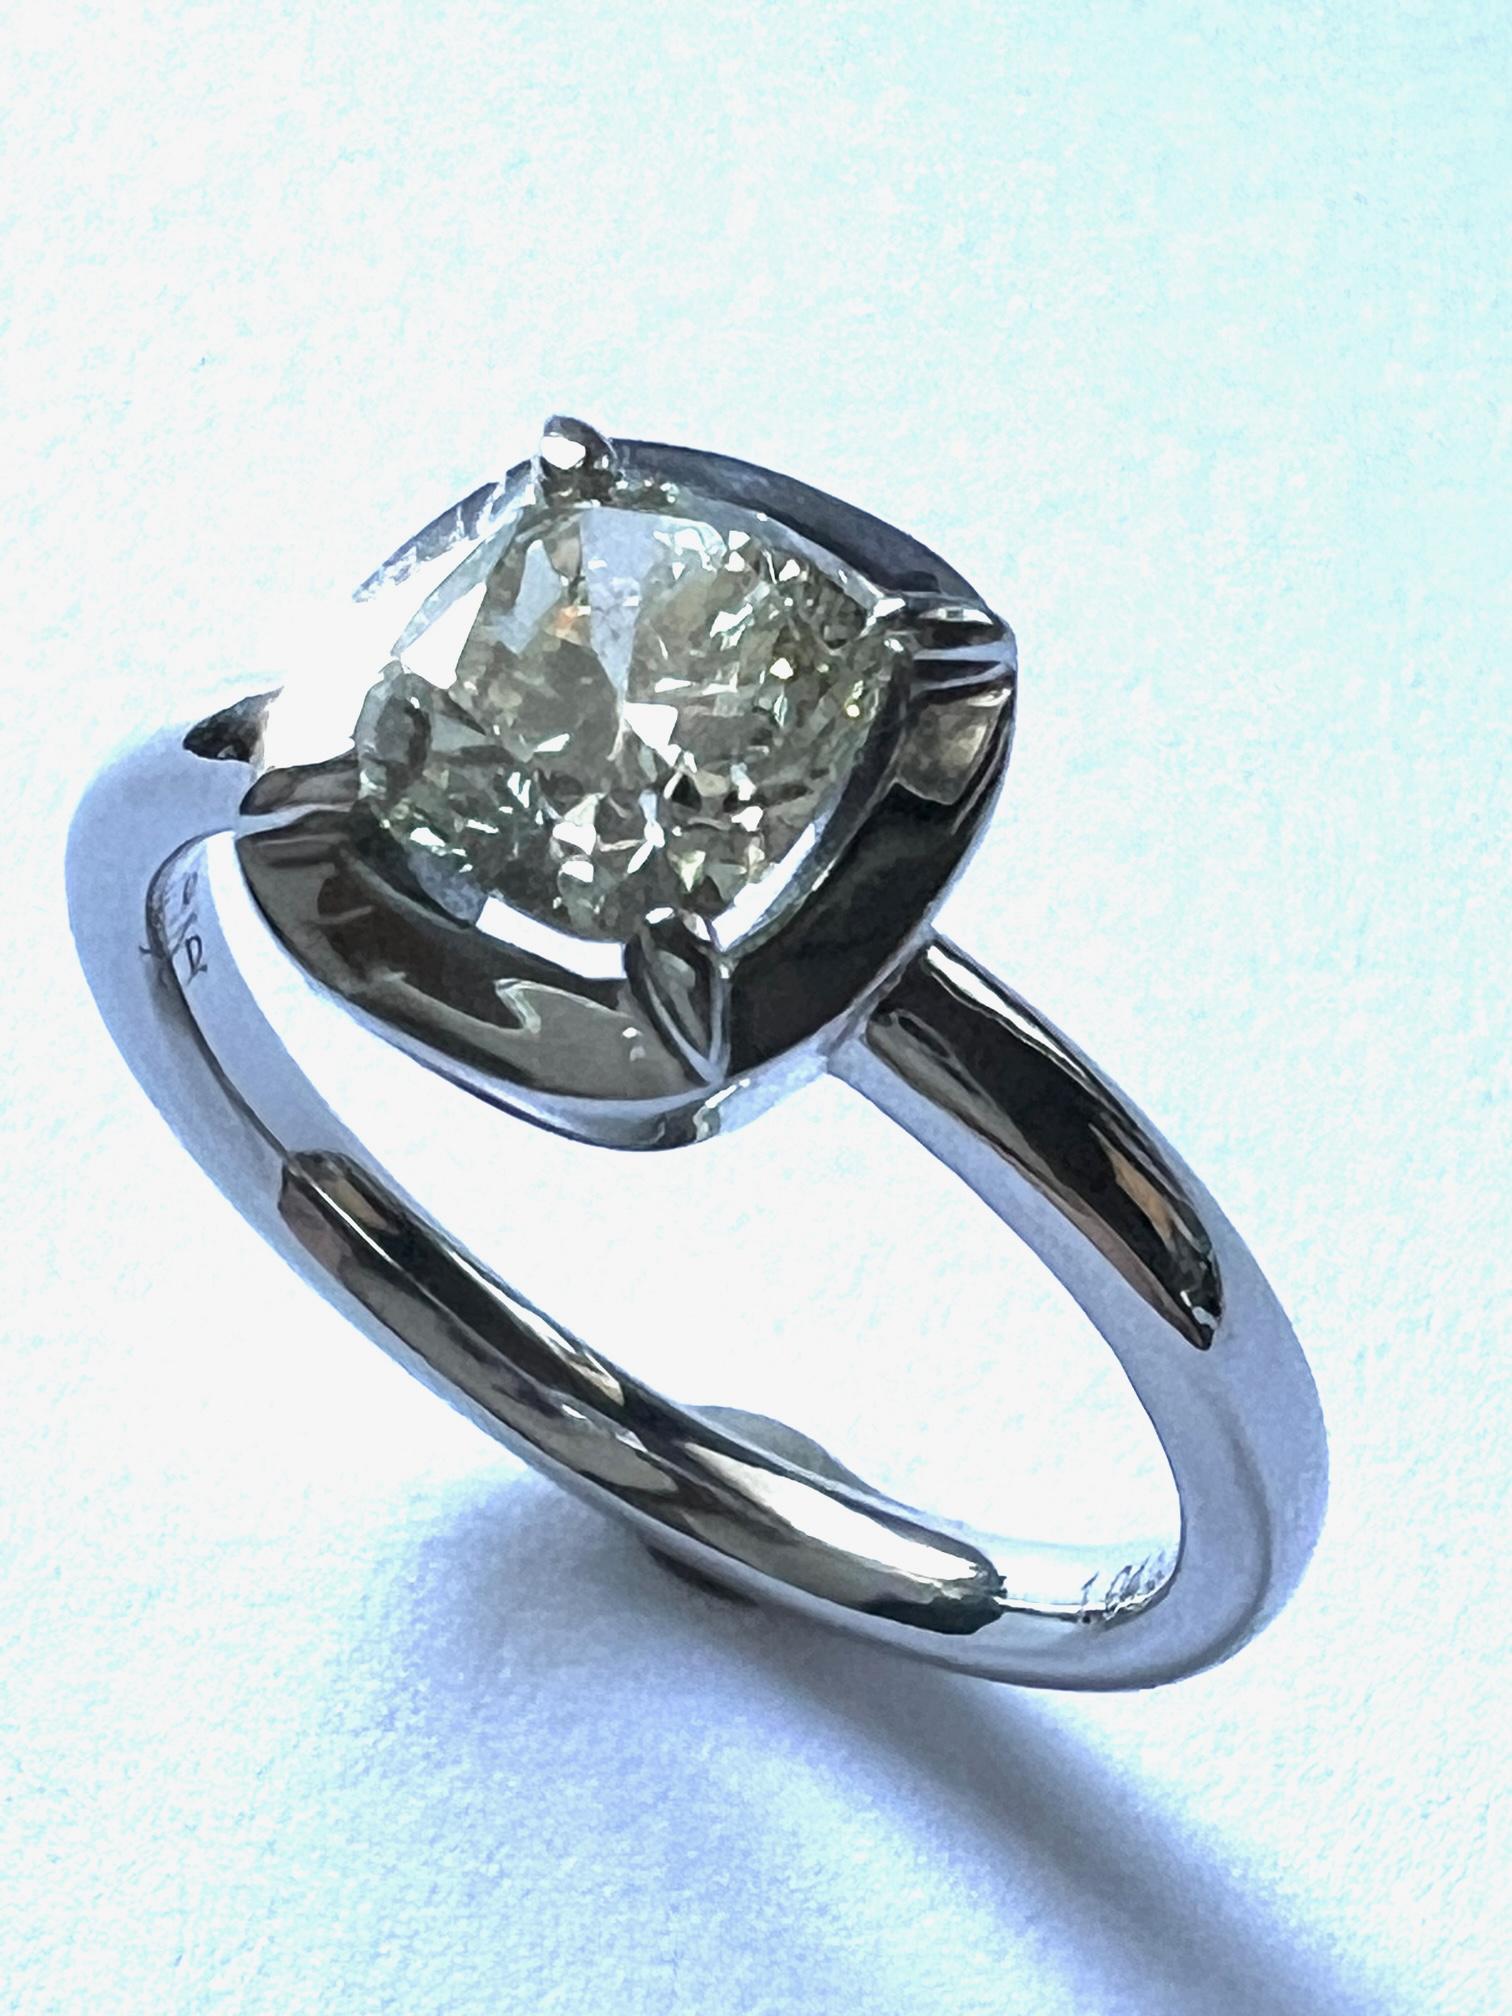 Ring in 950/ Platinum (5 gram), set with 1x Diamond (cushion, vintage-cut, Y/VVS, 0,93ct). 

This vintage stone has exceptional brilliance and a very warm colour saturation, bordering on a fancy color grading.

Ringsize is 53 (6 1/4). Resizable.